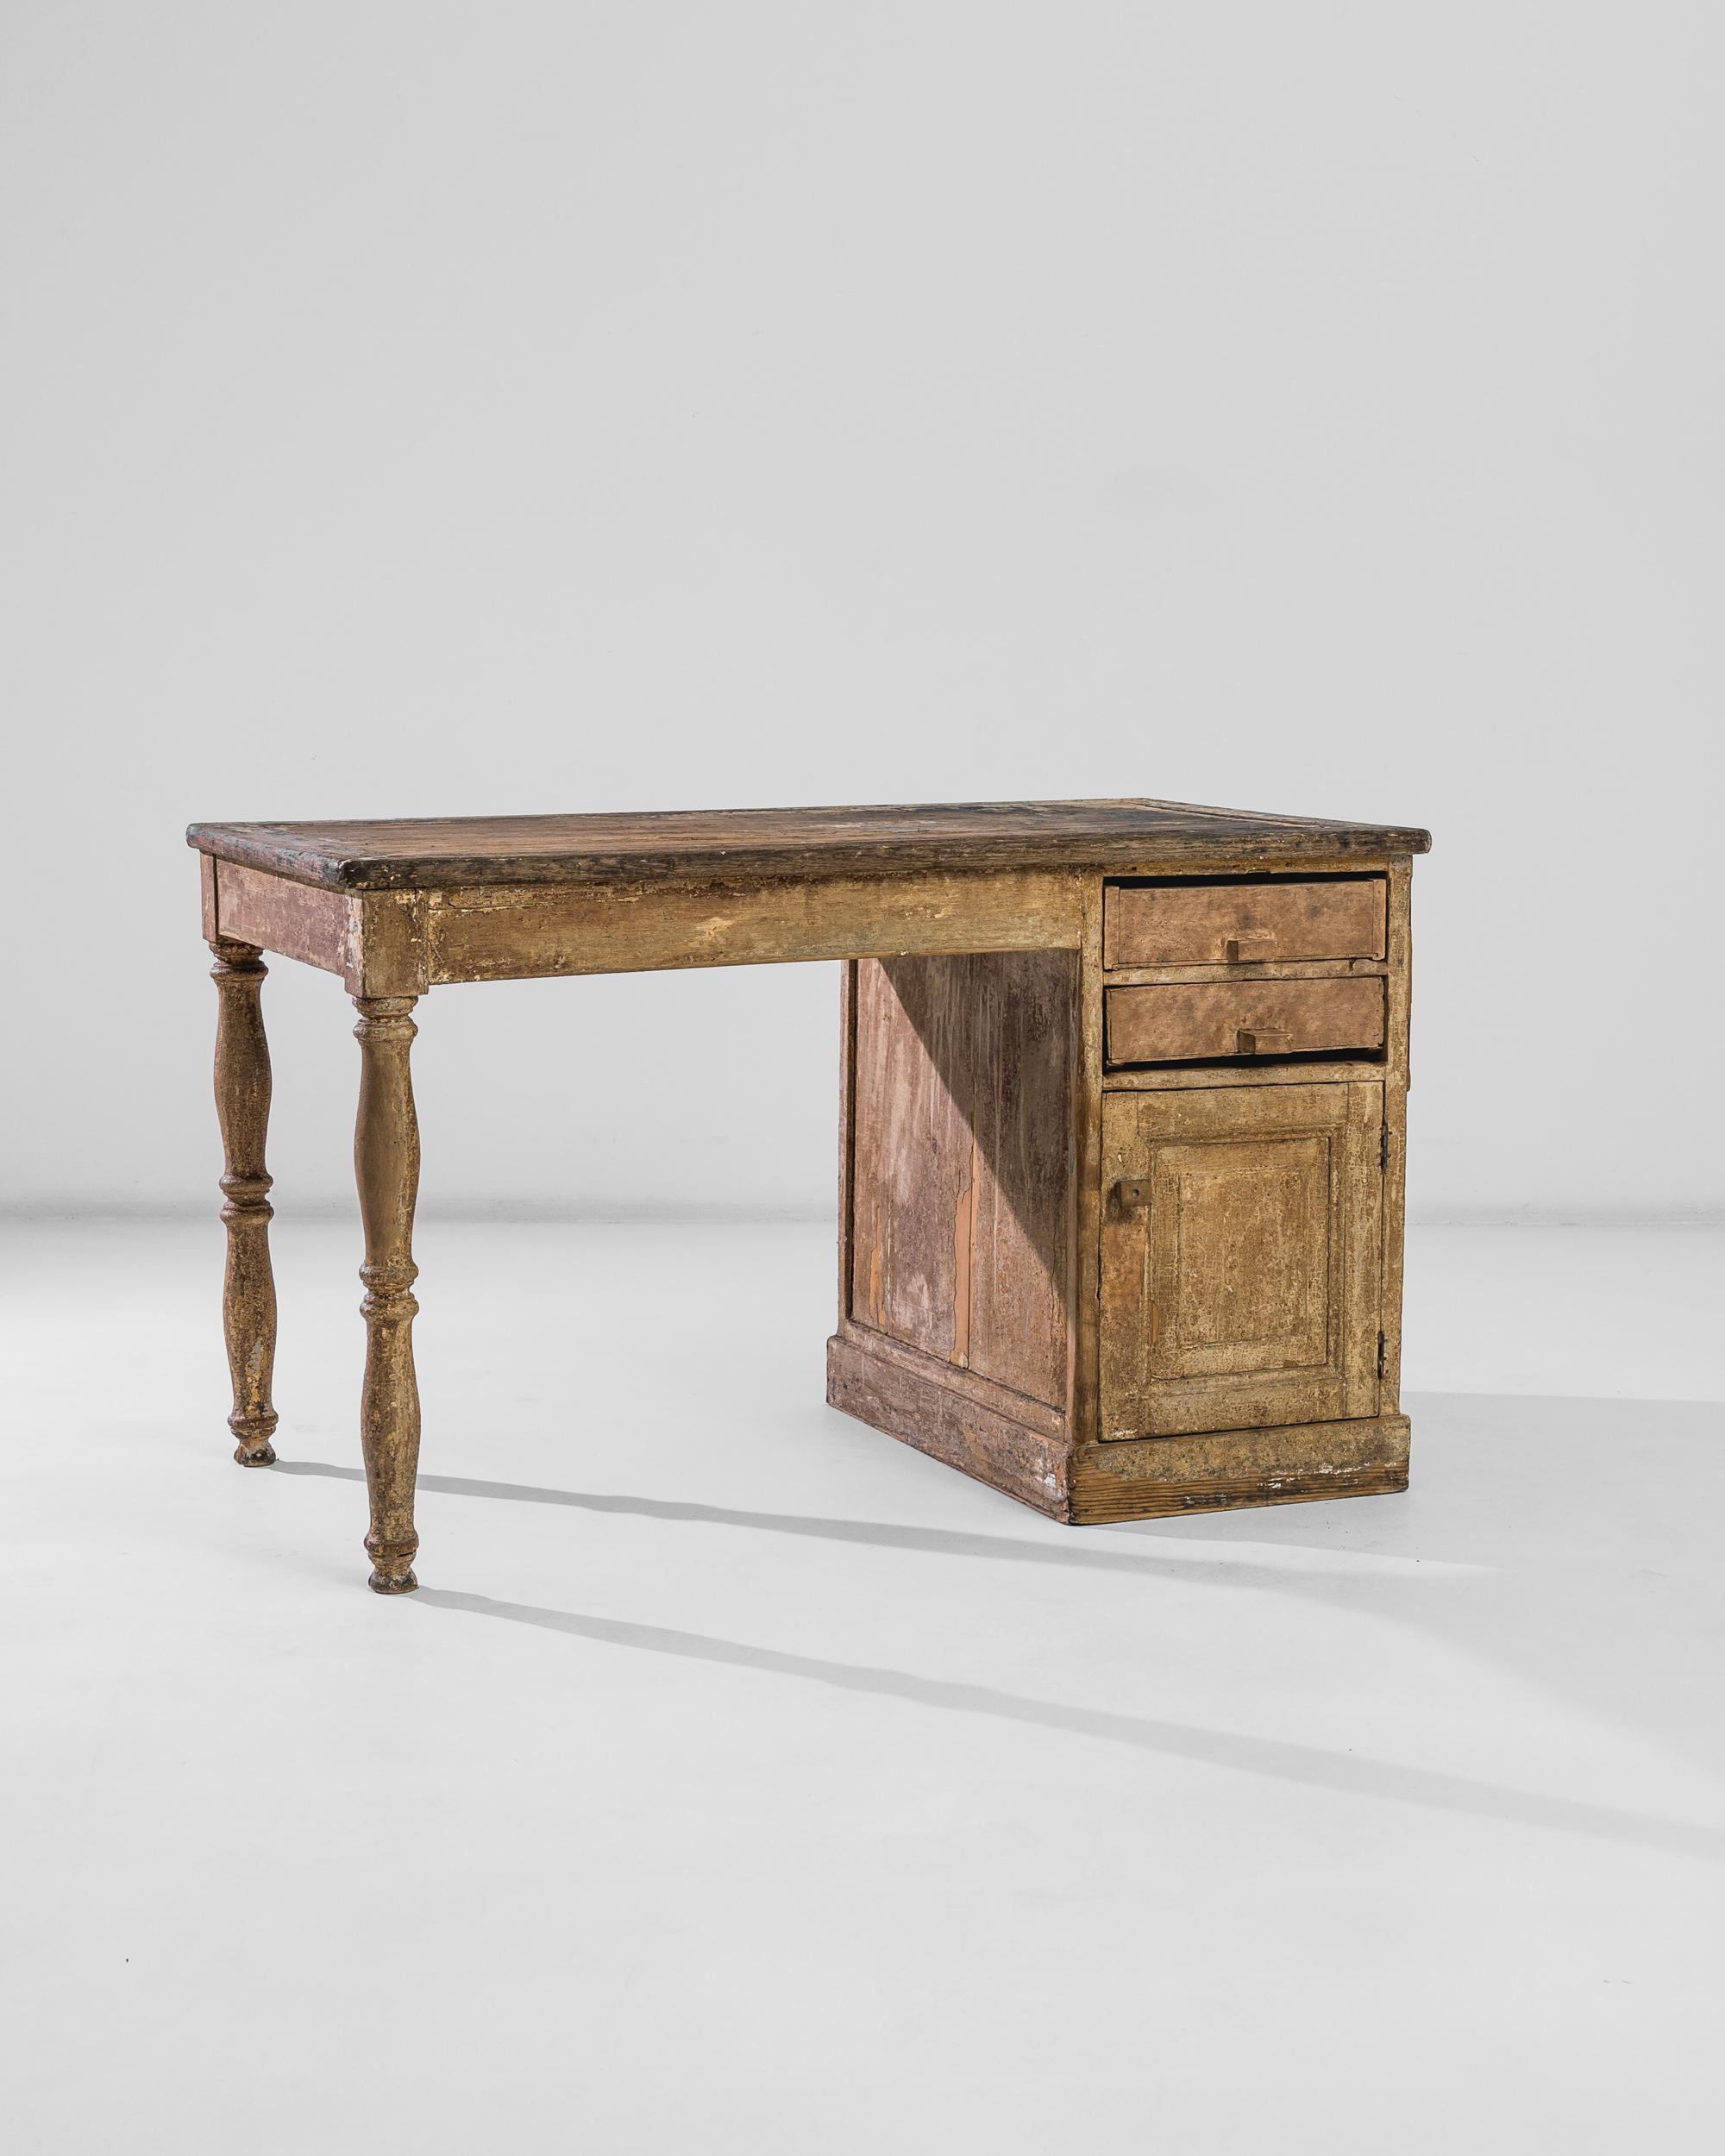 Patinated Turn of the Century French Writing Desk with Original Patina